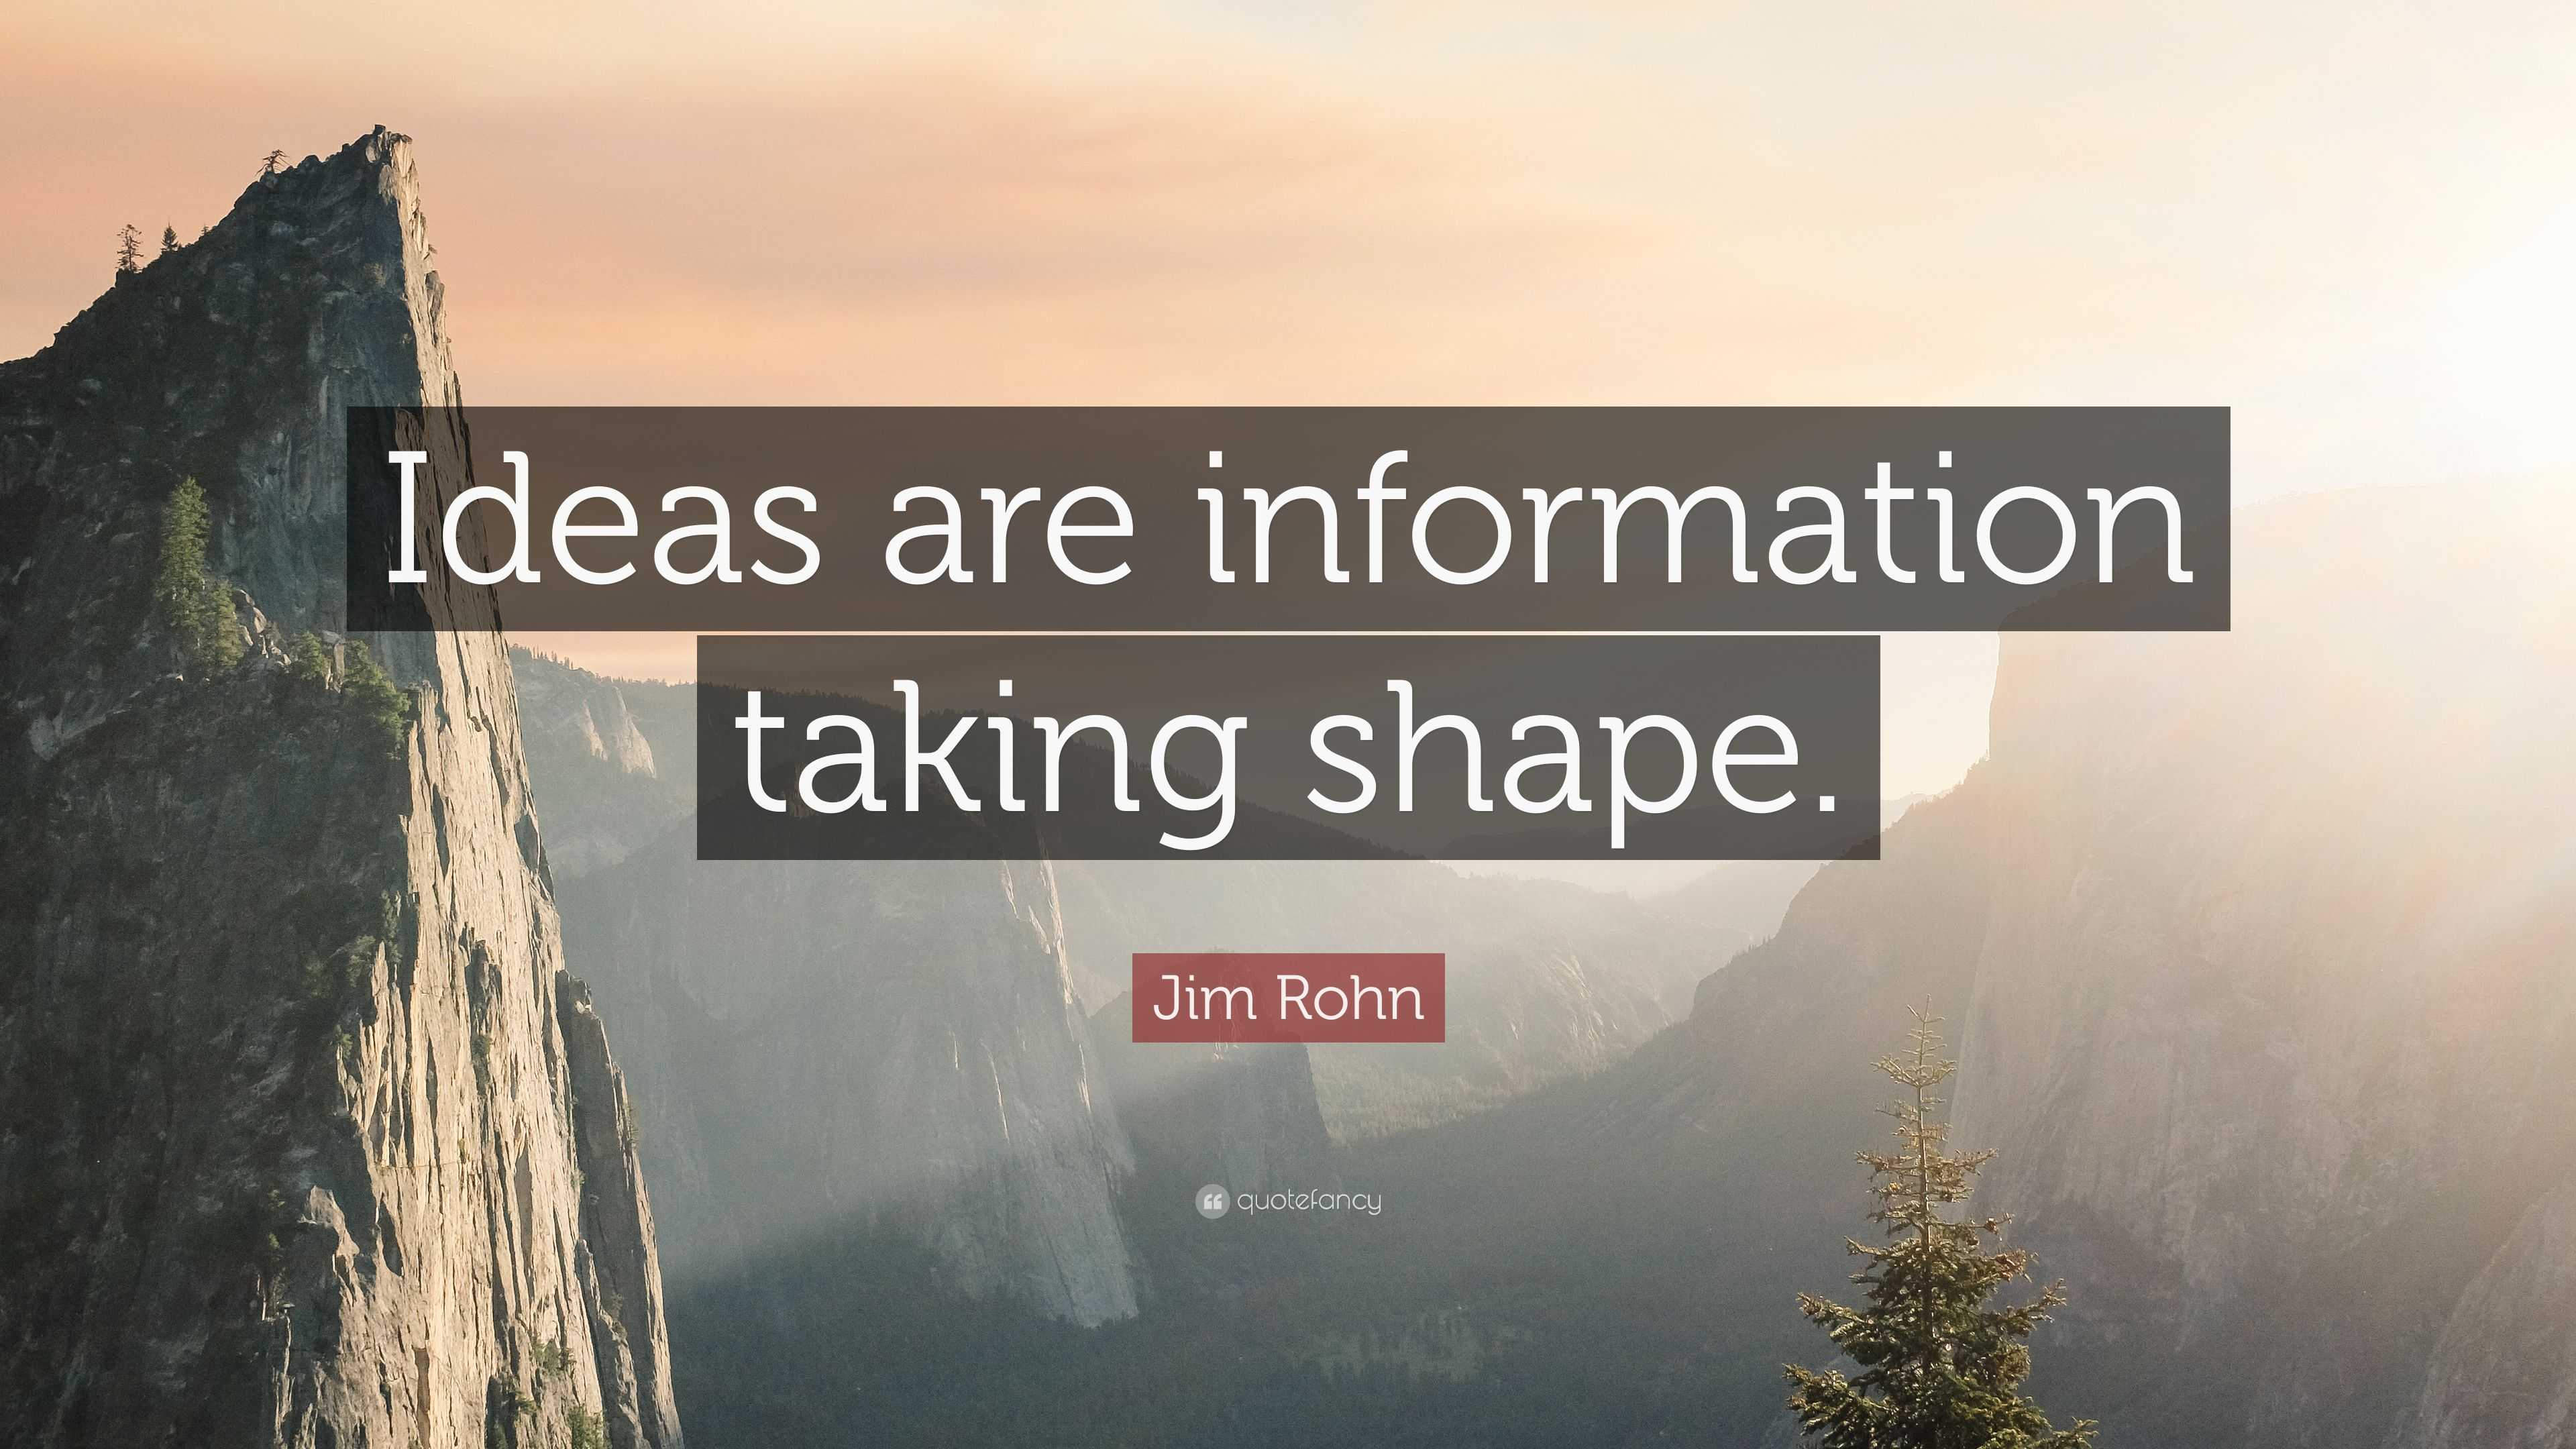 Jim Rohn Quote: “Ideas are information taking shape.”